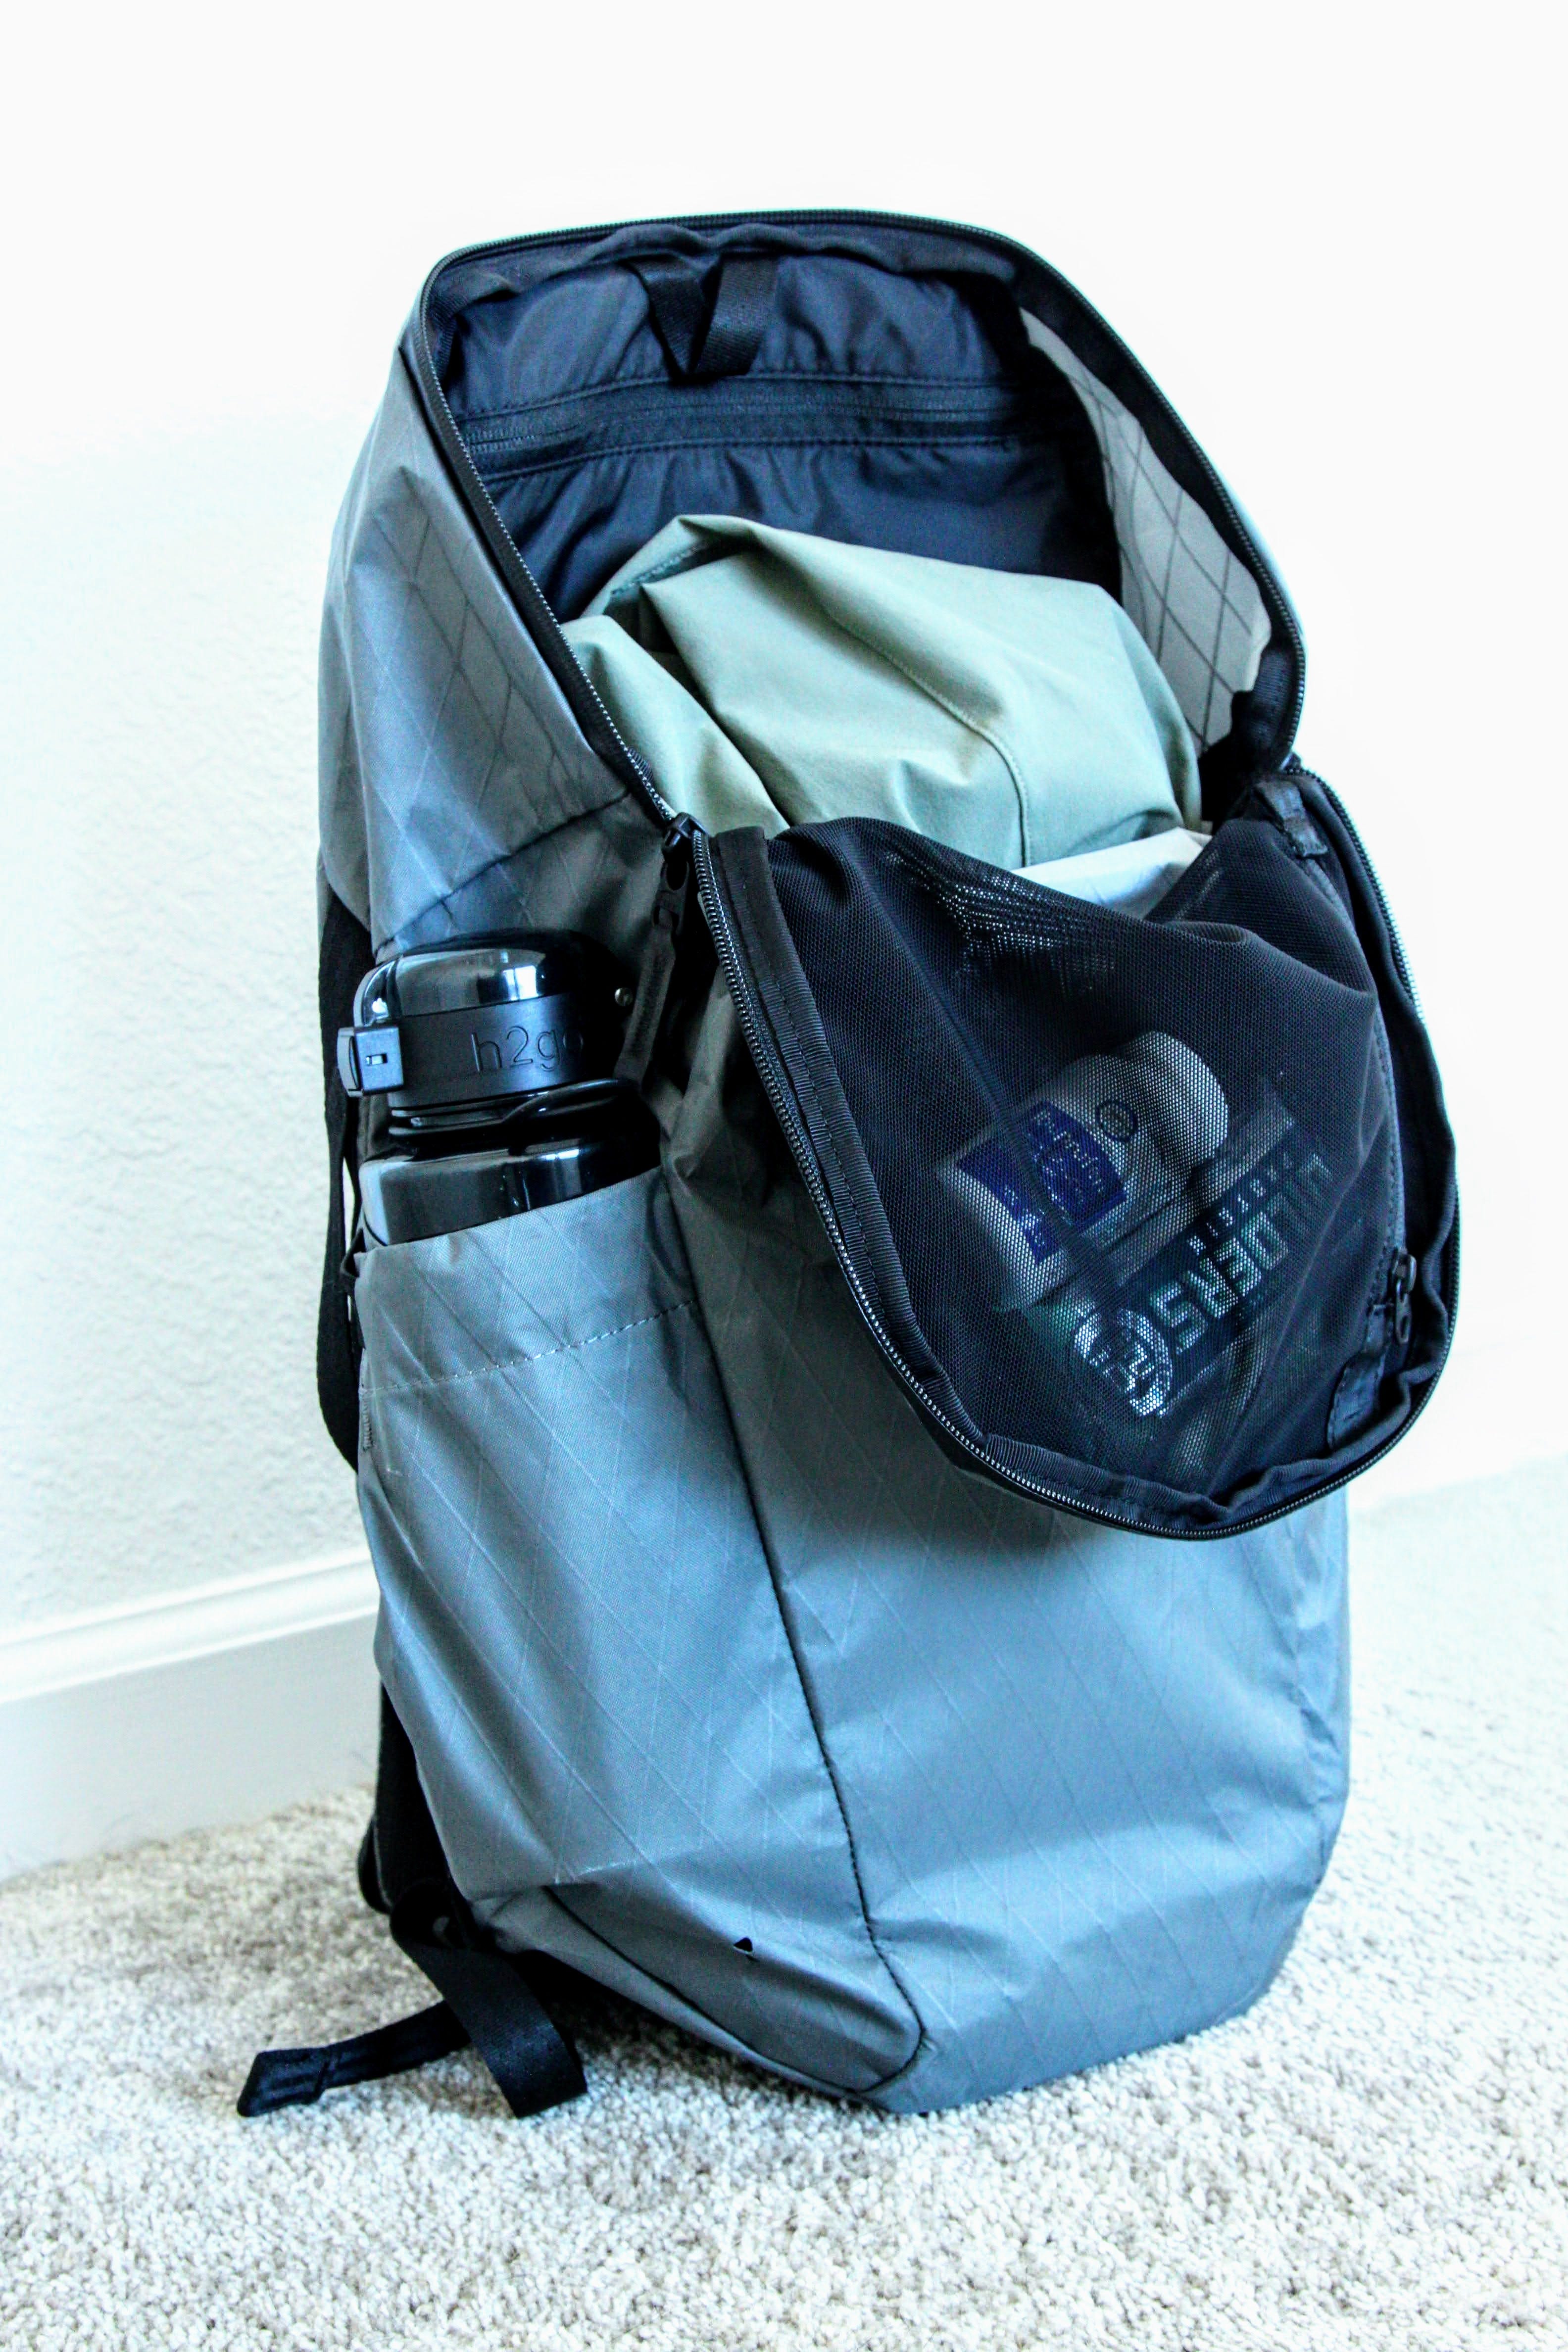 Able Carry Daybreaker Review. Able Carry launched their first bag… | by HL  | Pangolins with Packs